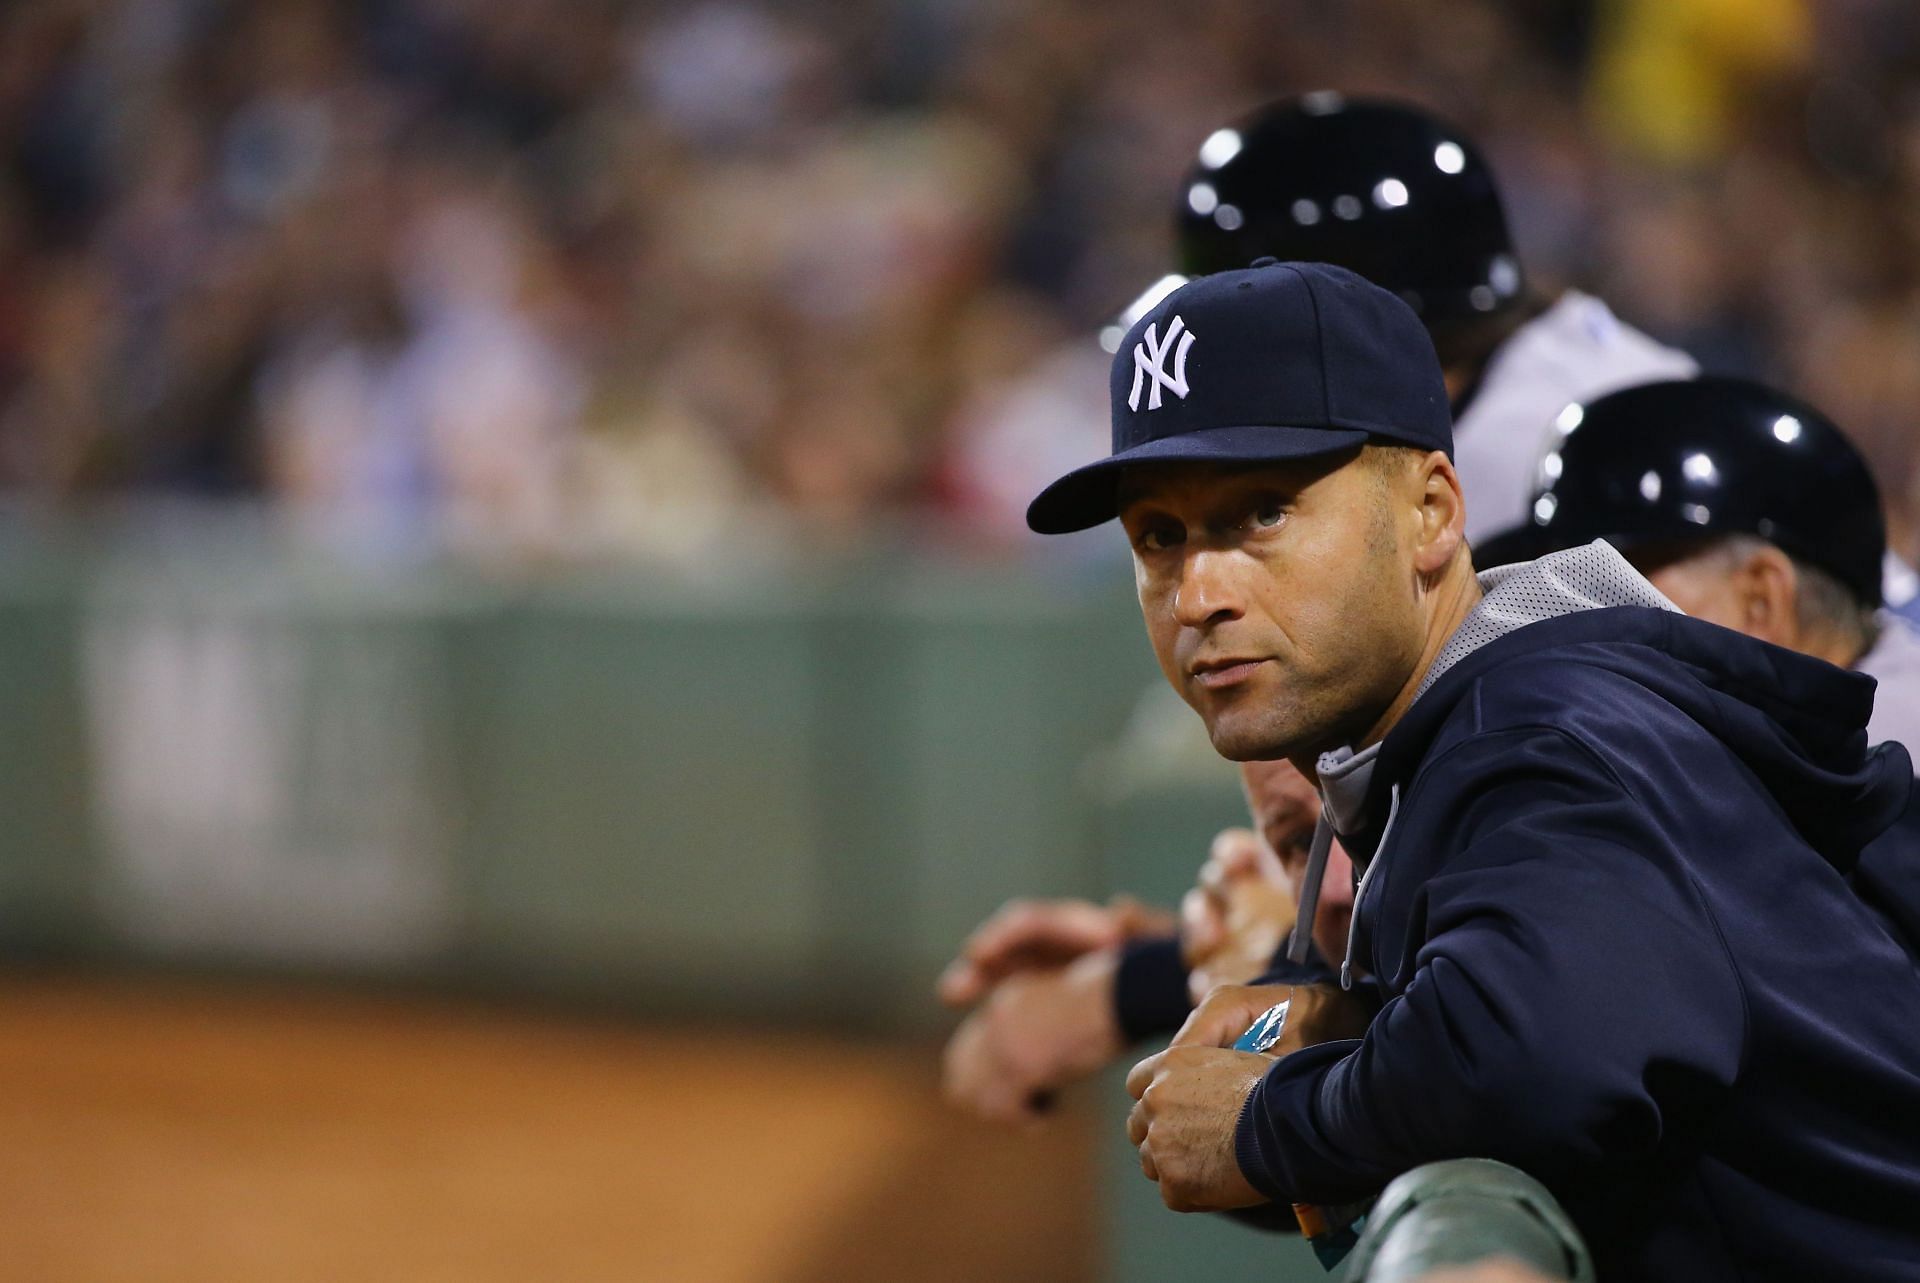 Derek Jeter of the New York Yankees looks on from the dugout during a game against the Boston Red Sox.